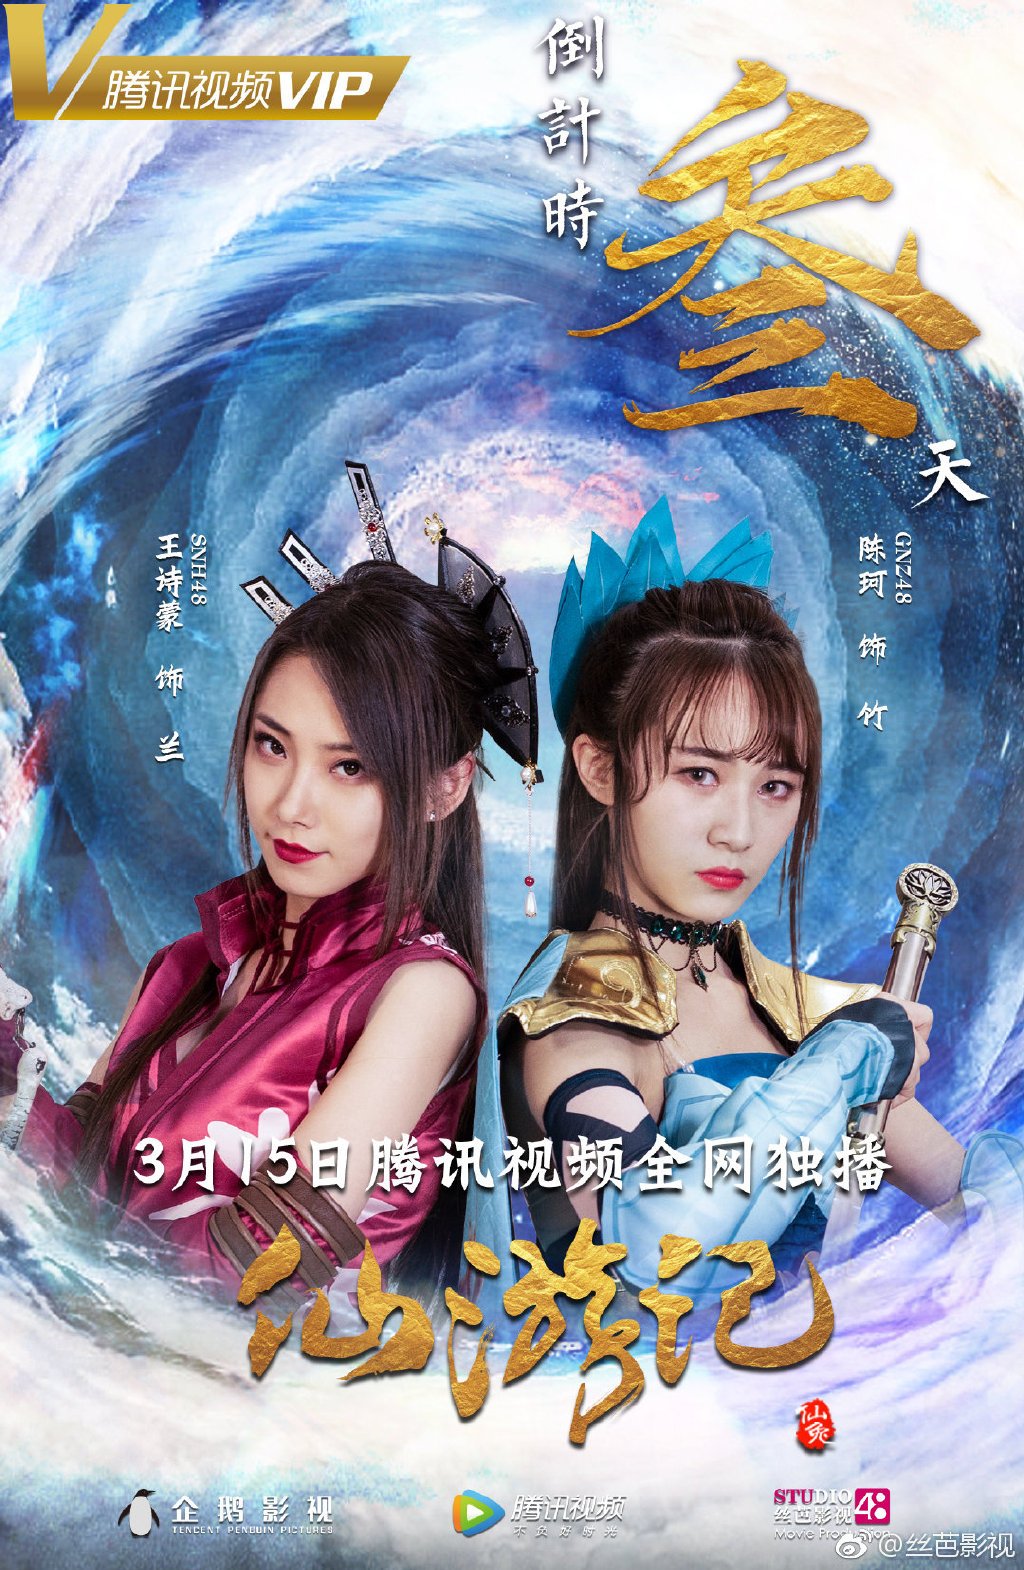 SNH48 Today on X: The last episode (number 12) of the first anime by  #SNH48 无限少女48 (Infinite 48) has gone online on Tencent VIP    / X